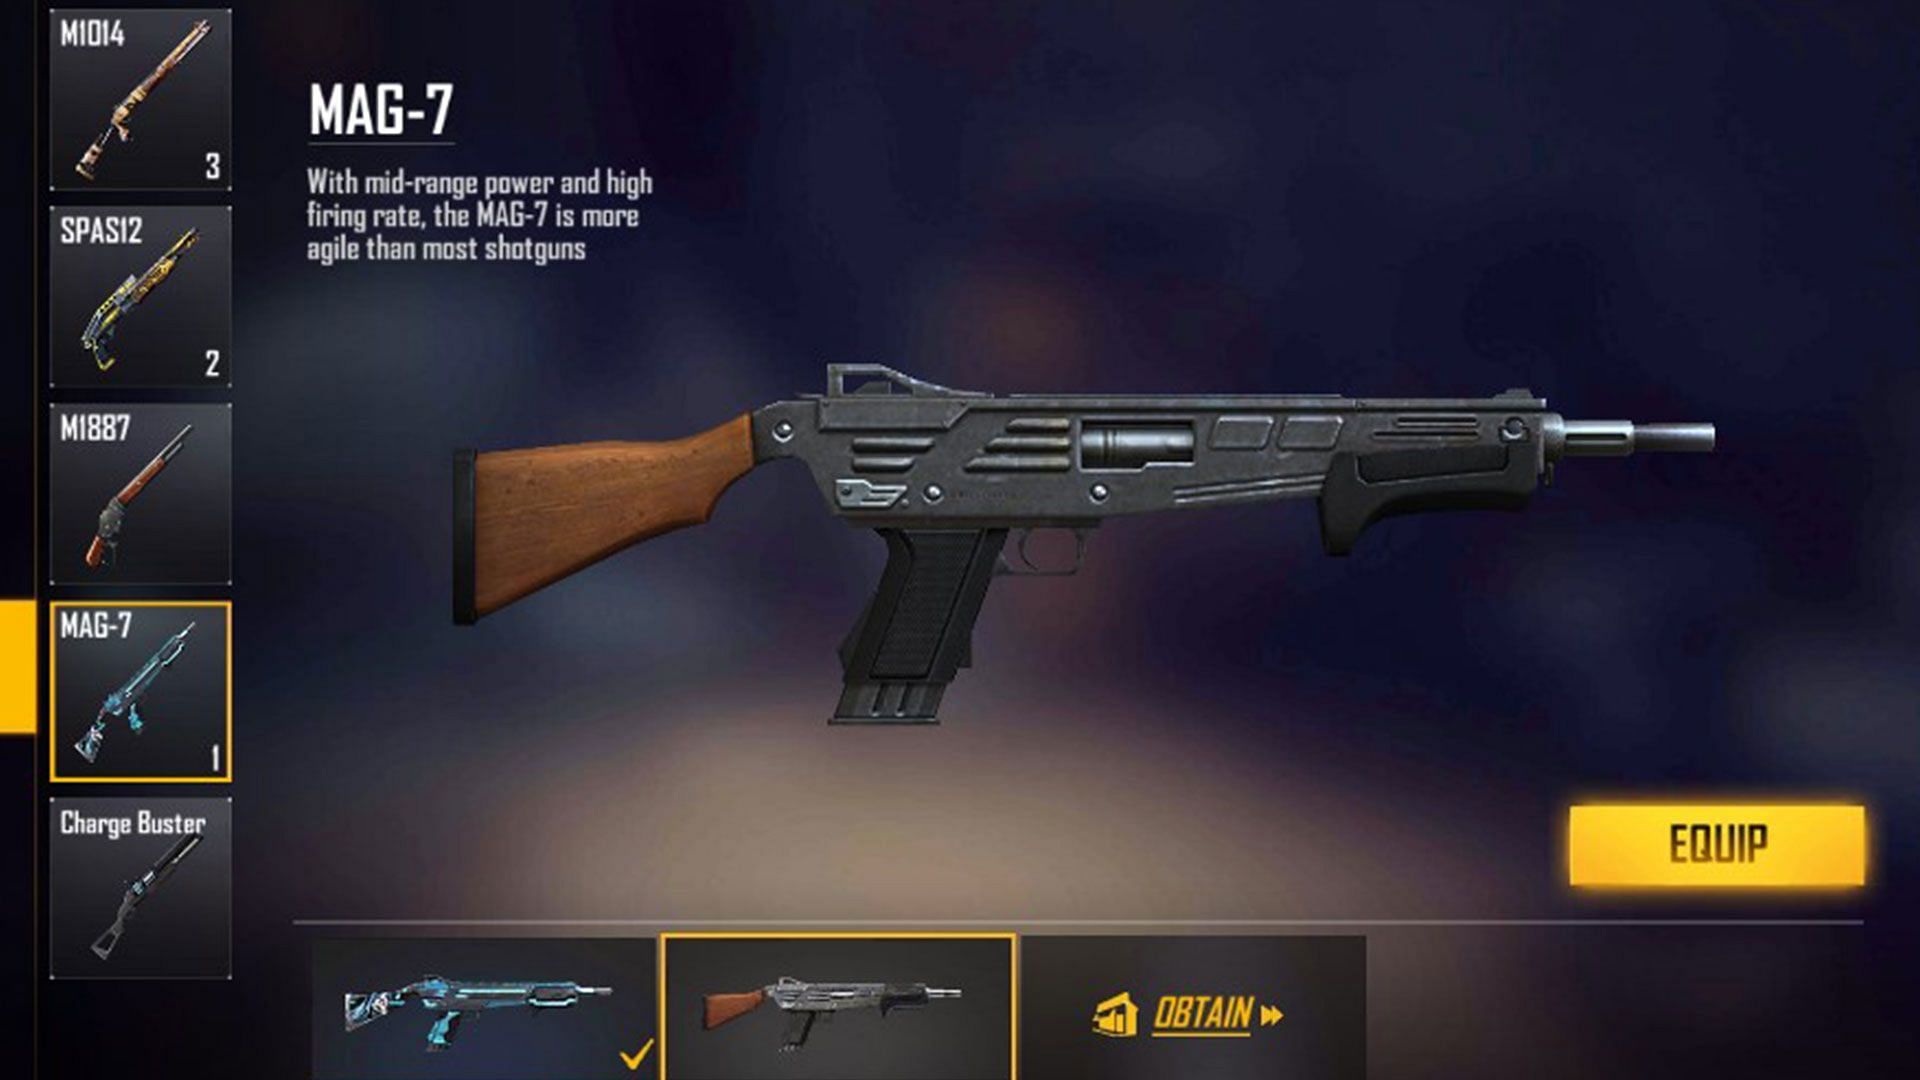 MAG-7 has better accuracy than other shotguns in Free Fire Max (Image via Garena)